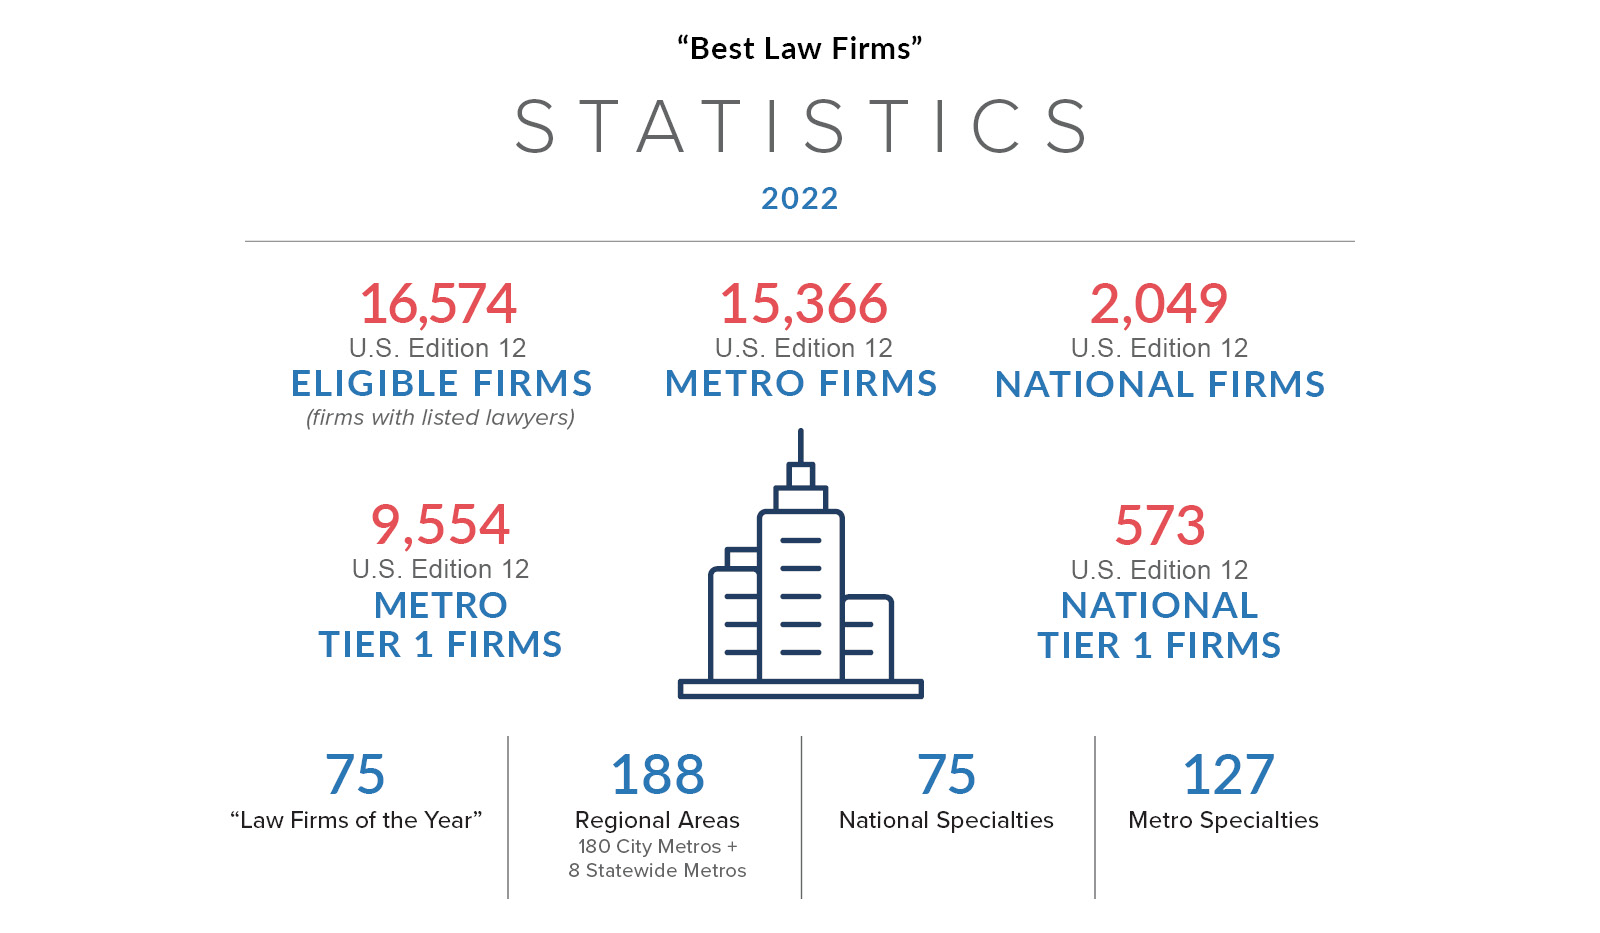 Best Law Firms Stats 2022